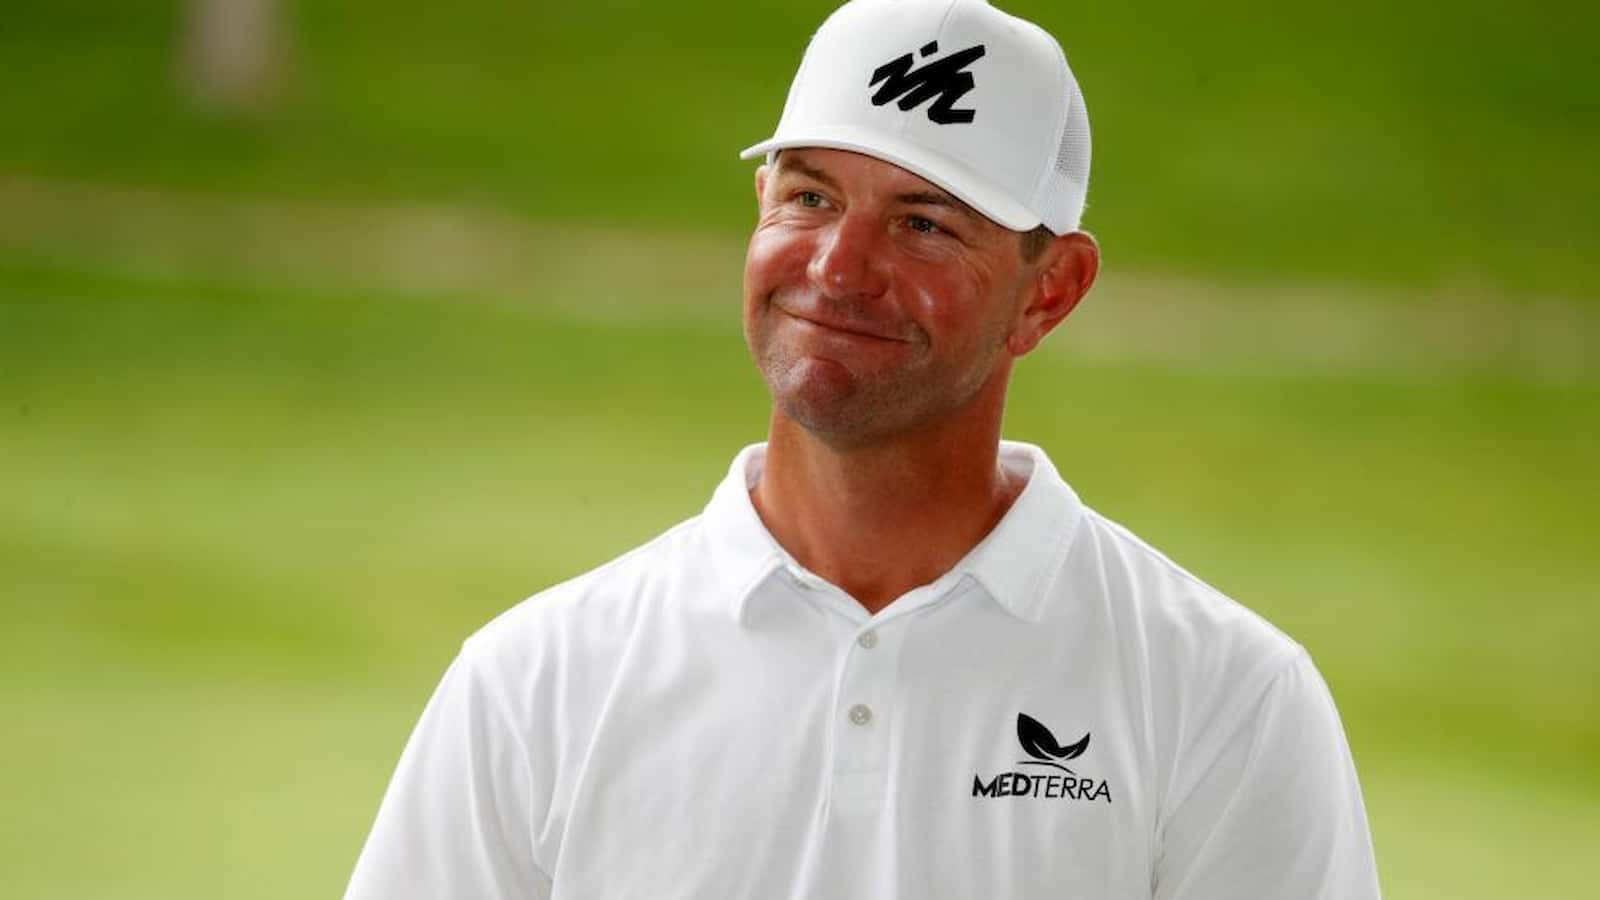 Lucas Glover Biography: Age, Birthday, Height, Career, Net Worth in 2023